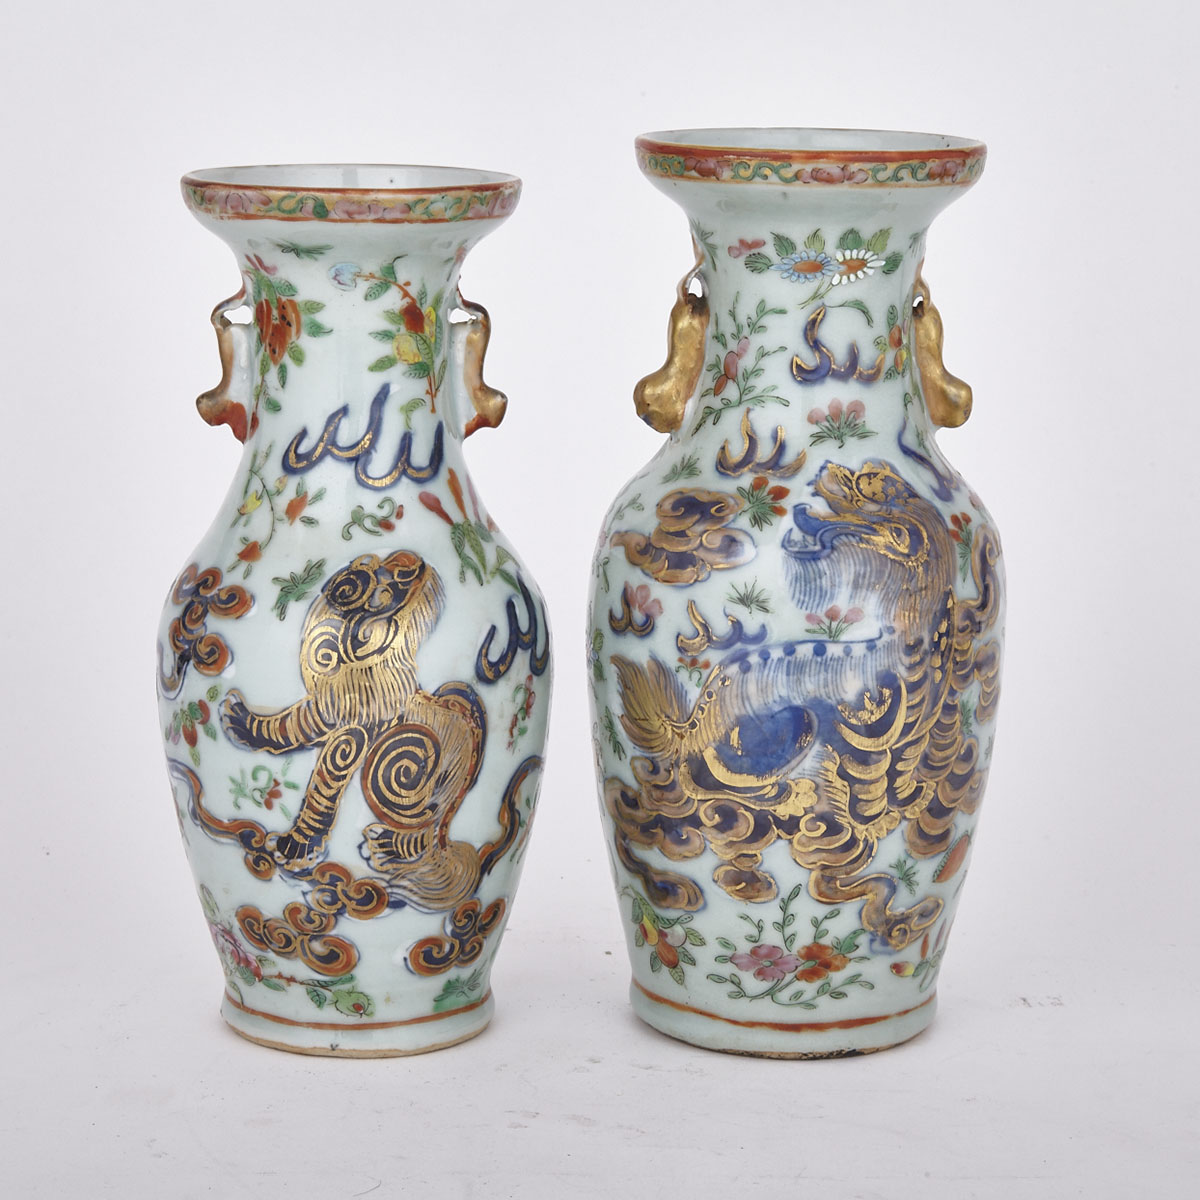 Pair of Export ‘Clobbered’ Famille Rose Baluster Vases, 19th Century